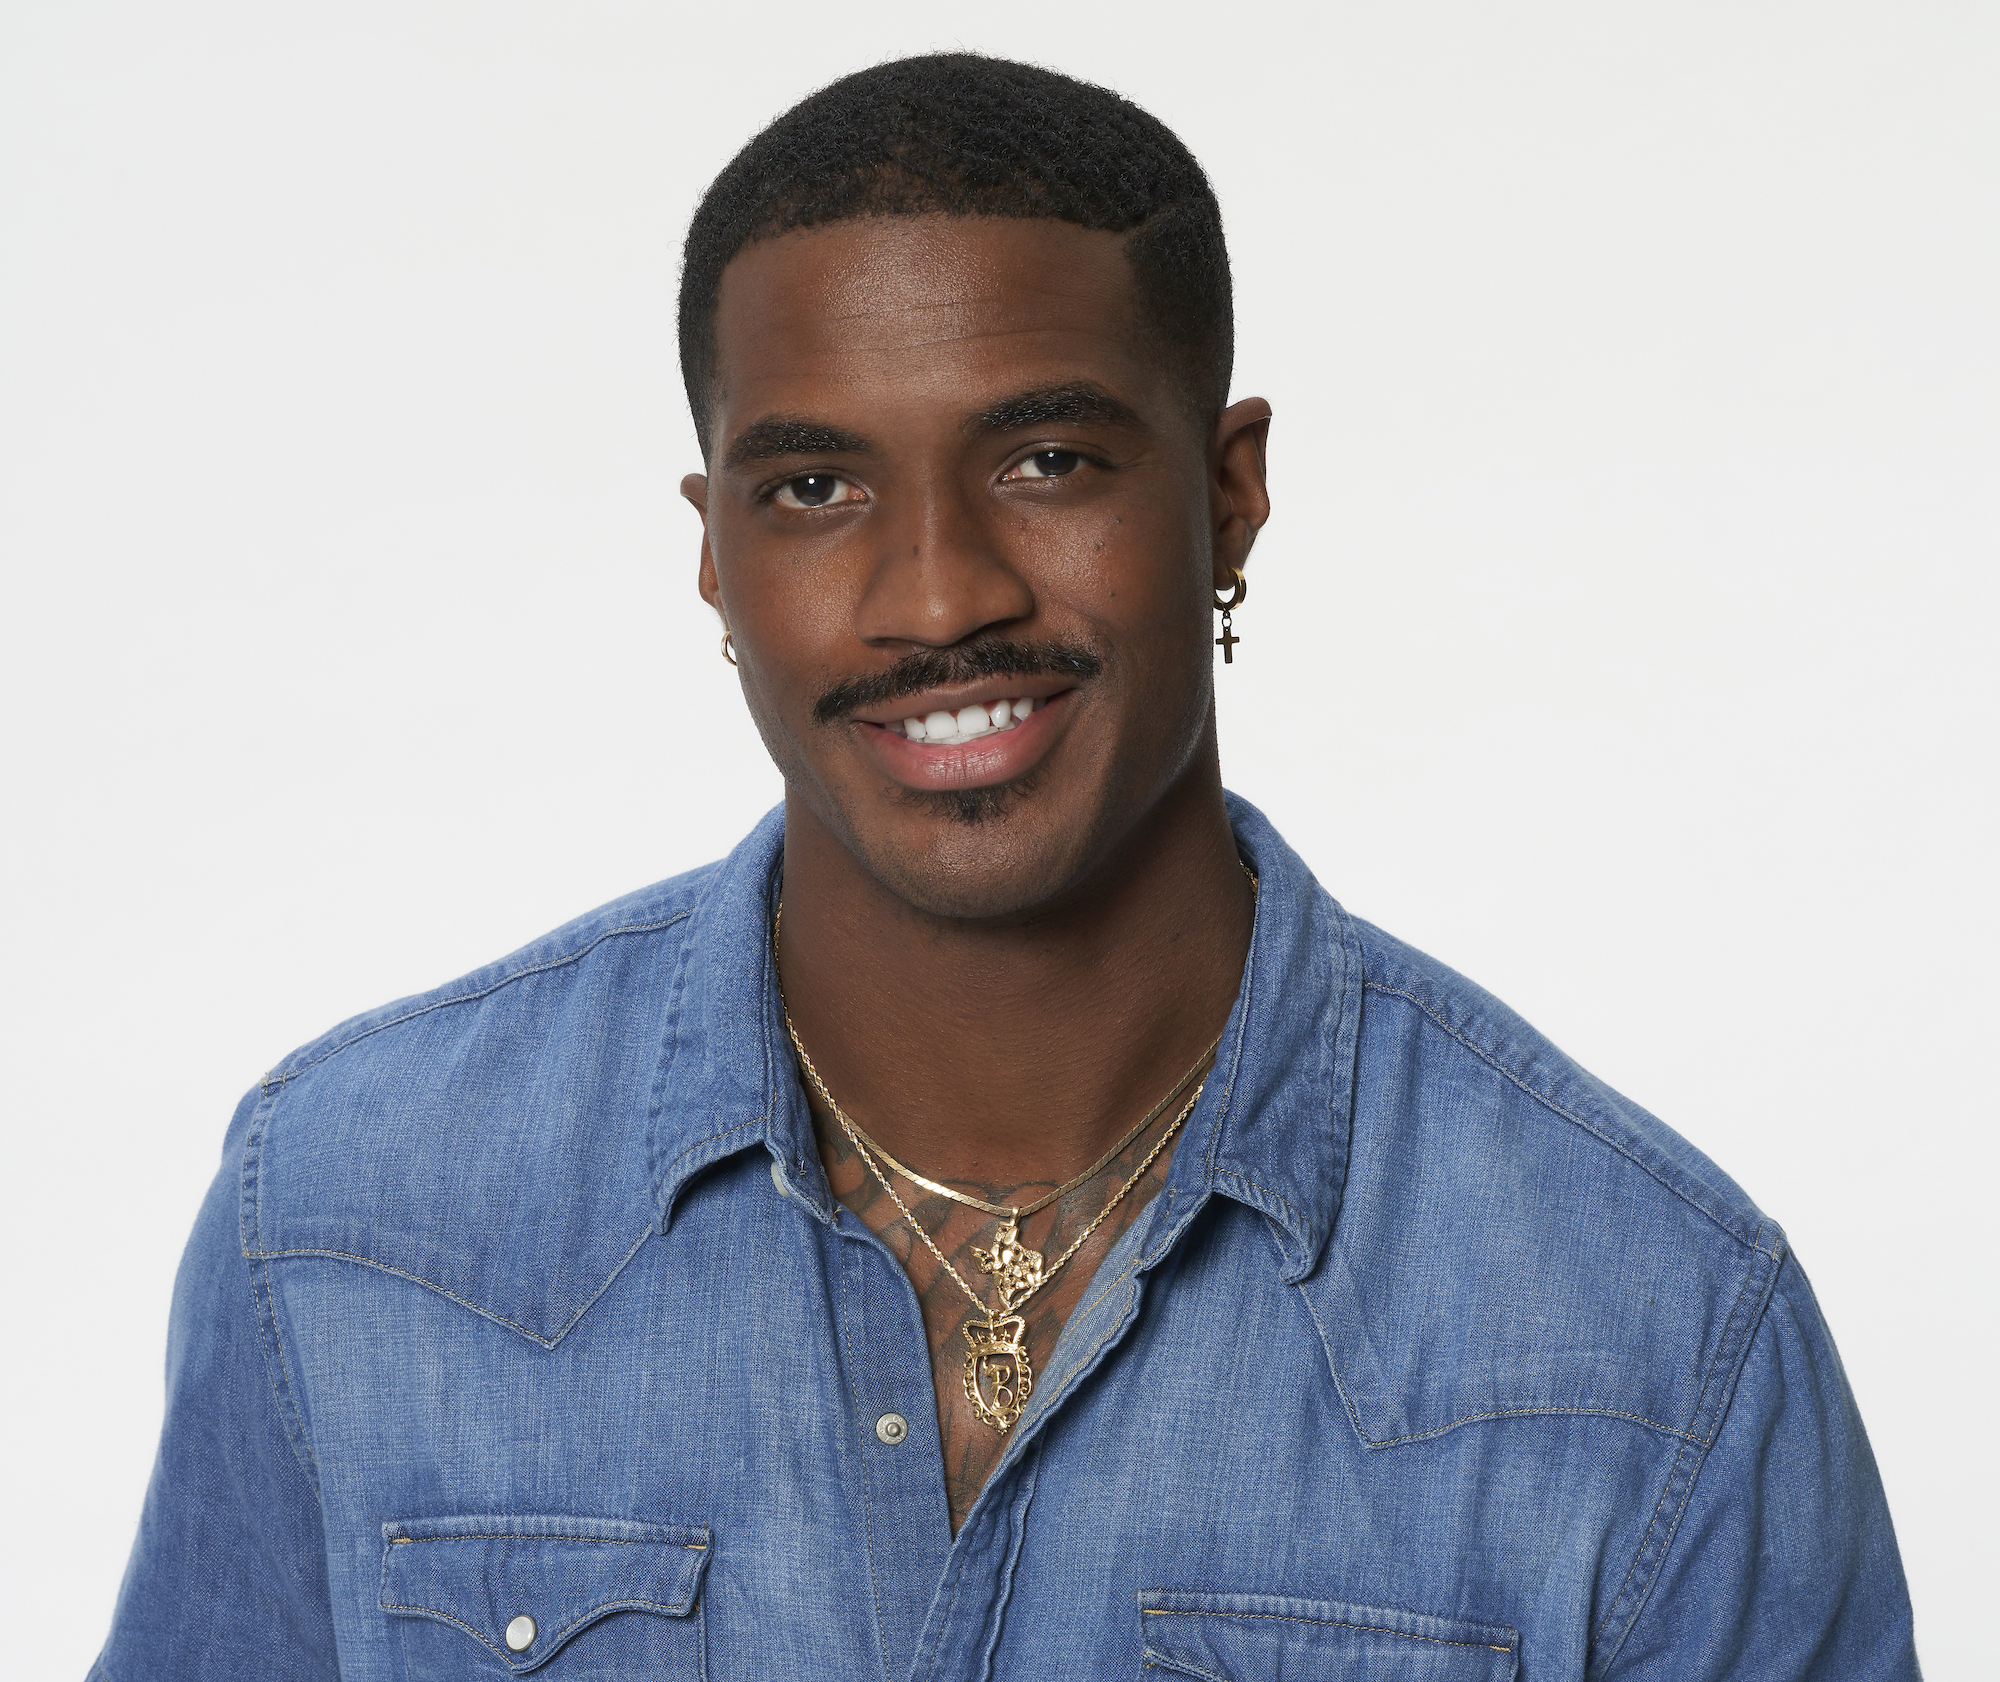 PJ Henderson in a blue shirt. PJ is one of the suitors on Michelle Young's season of 'The Bachelorette.'